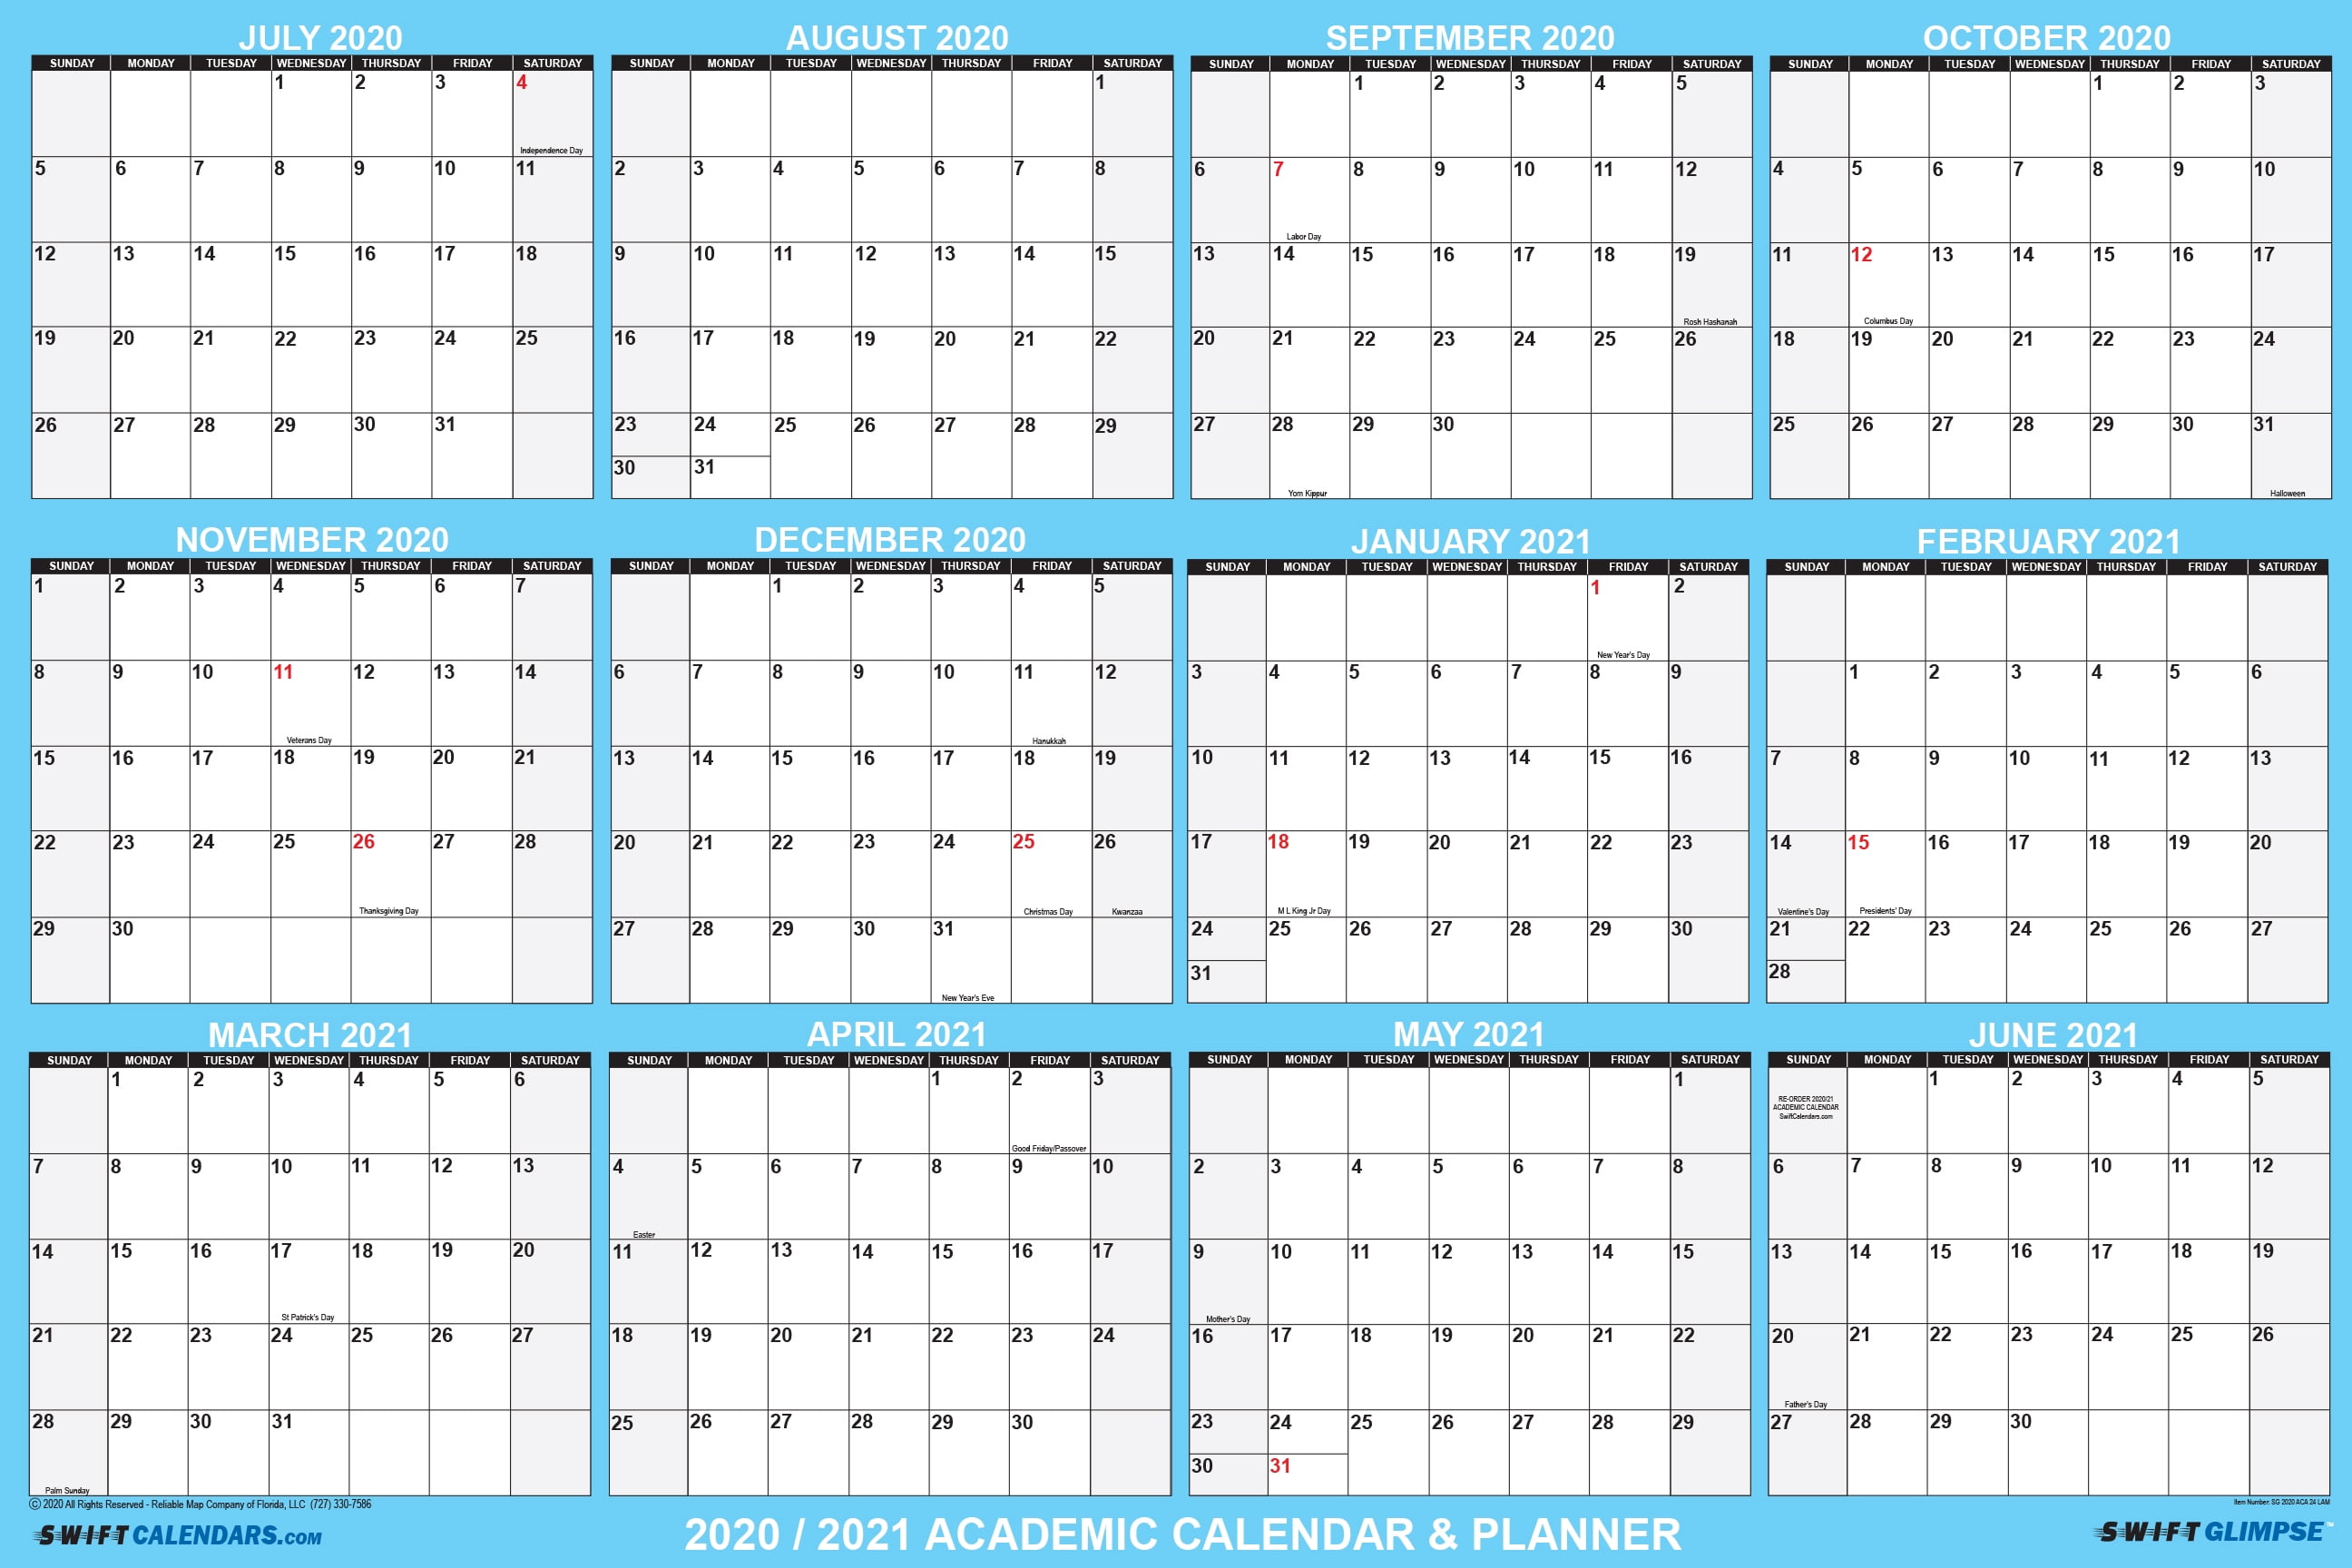 SwiftGlimpse 2020 Dry Erase Wall Calendar Planner Planning at a glance 24x36 